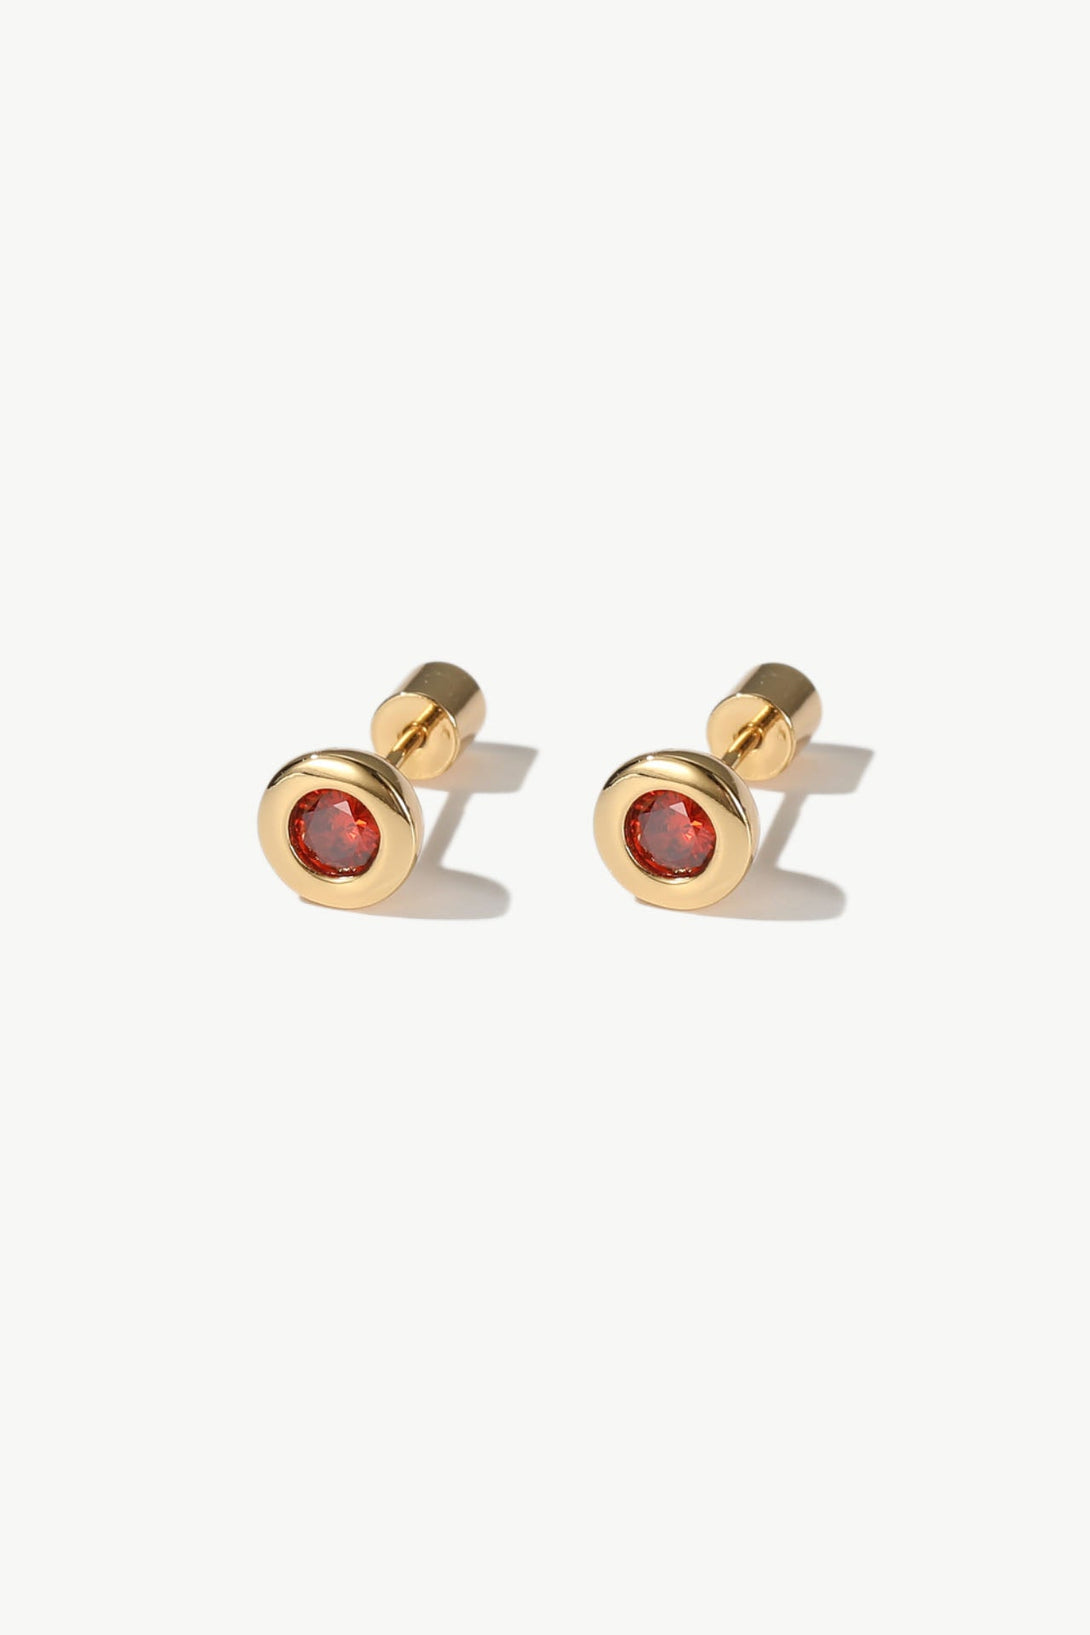 Aurora Gold Bezel Set Ruby Red Solitaire Stud Earrings - Classicharms